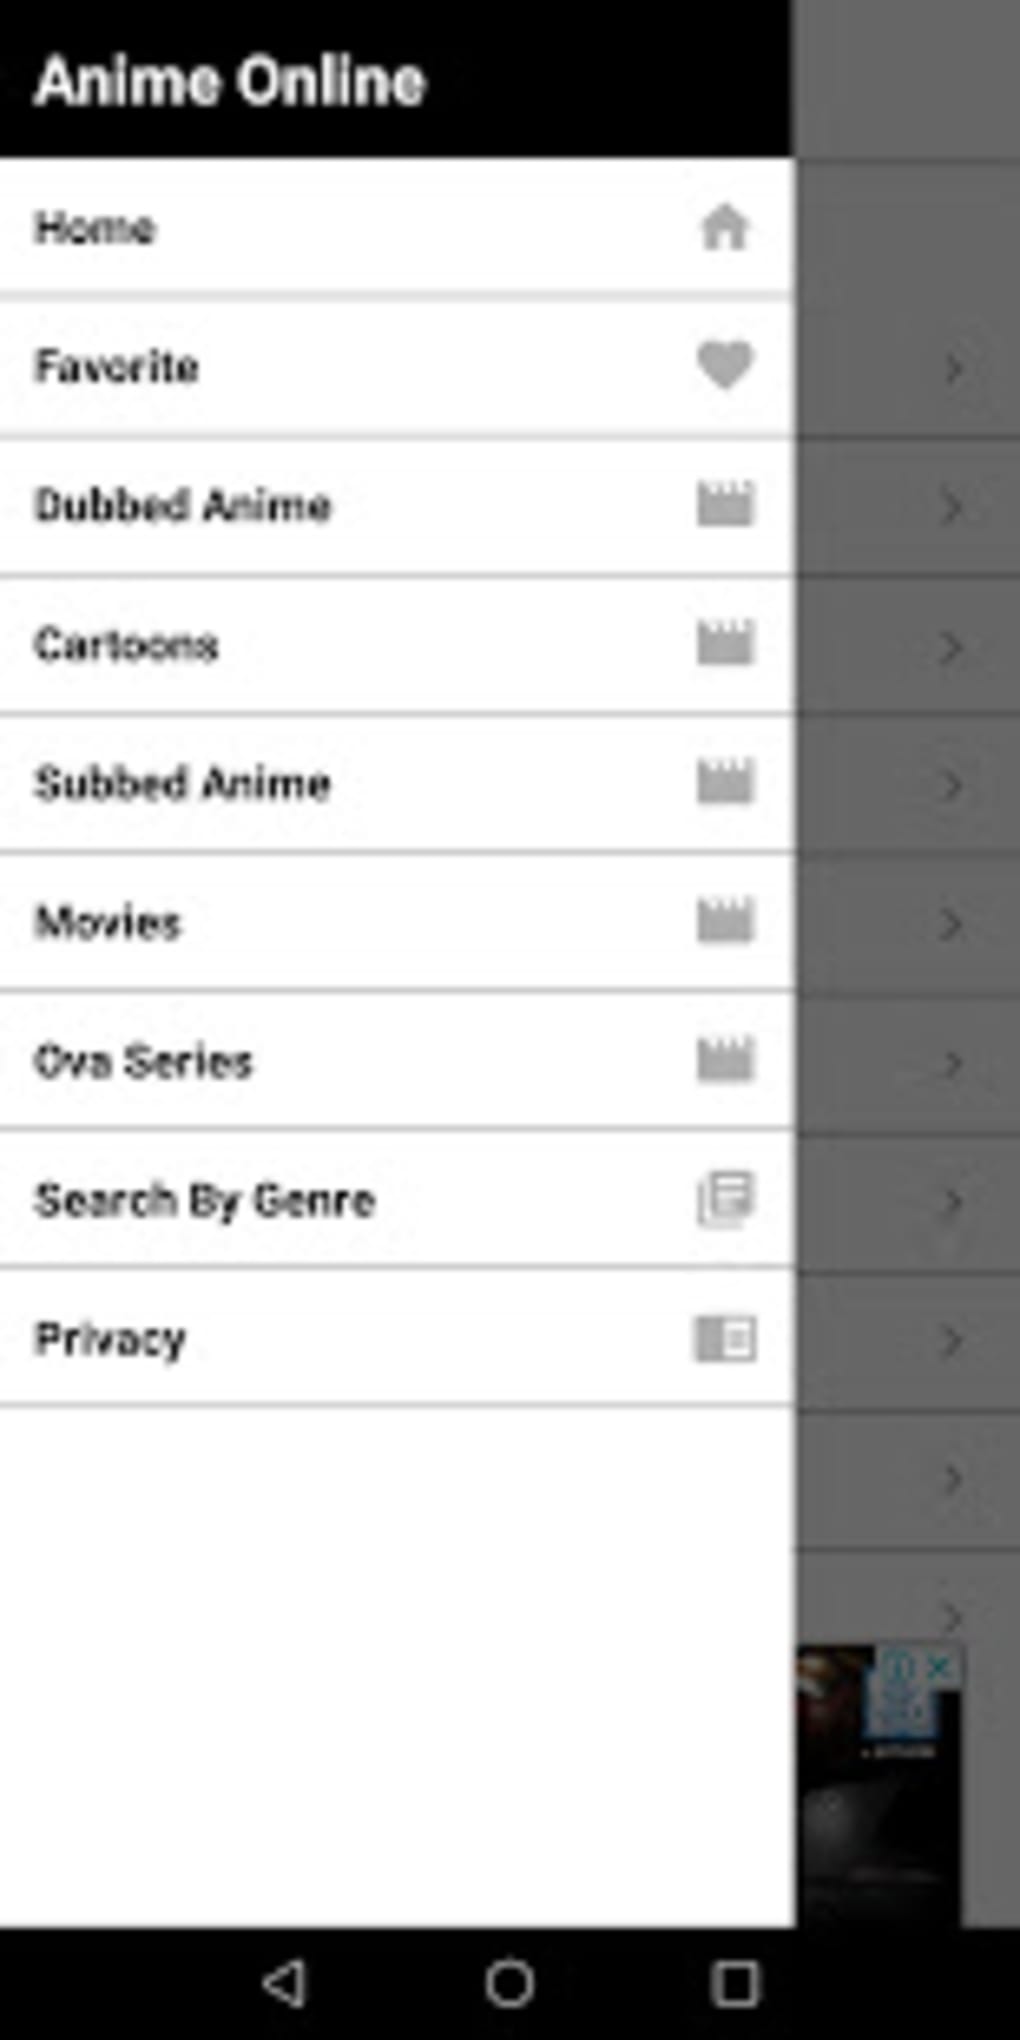 Animes Online Grátis APK for Android Download